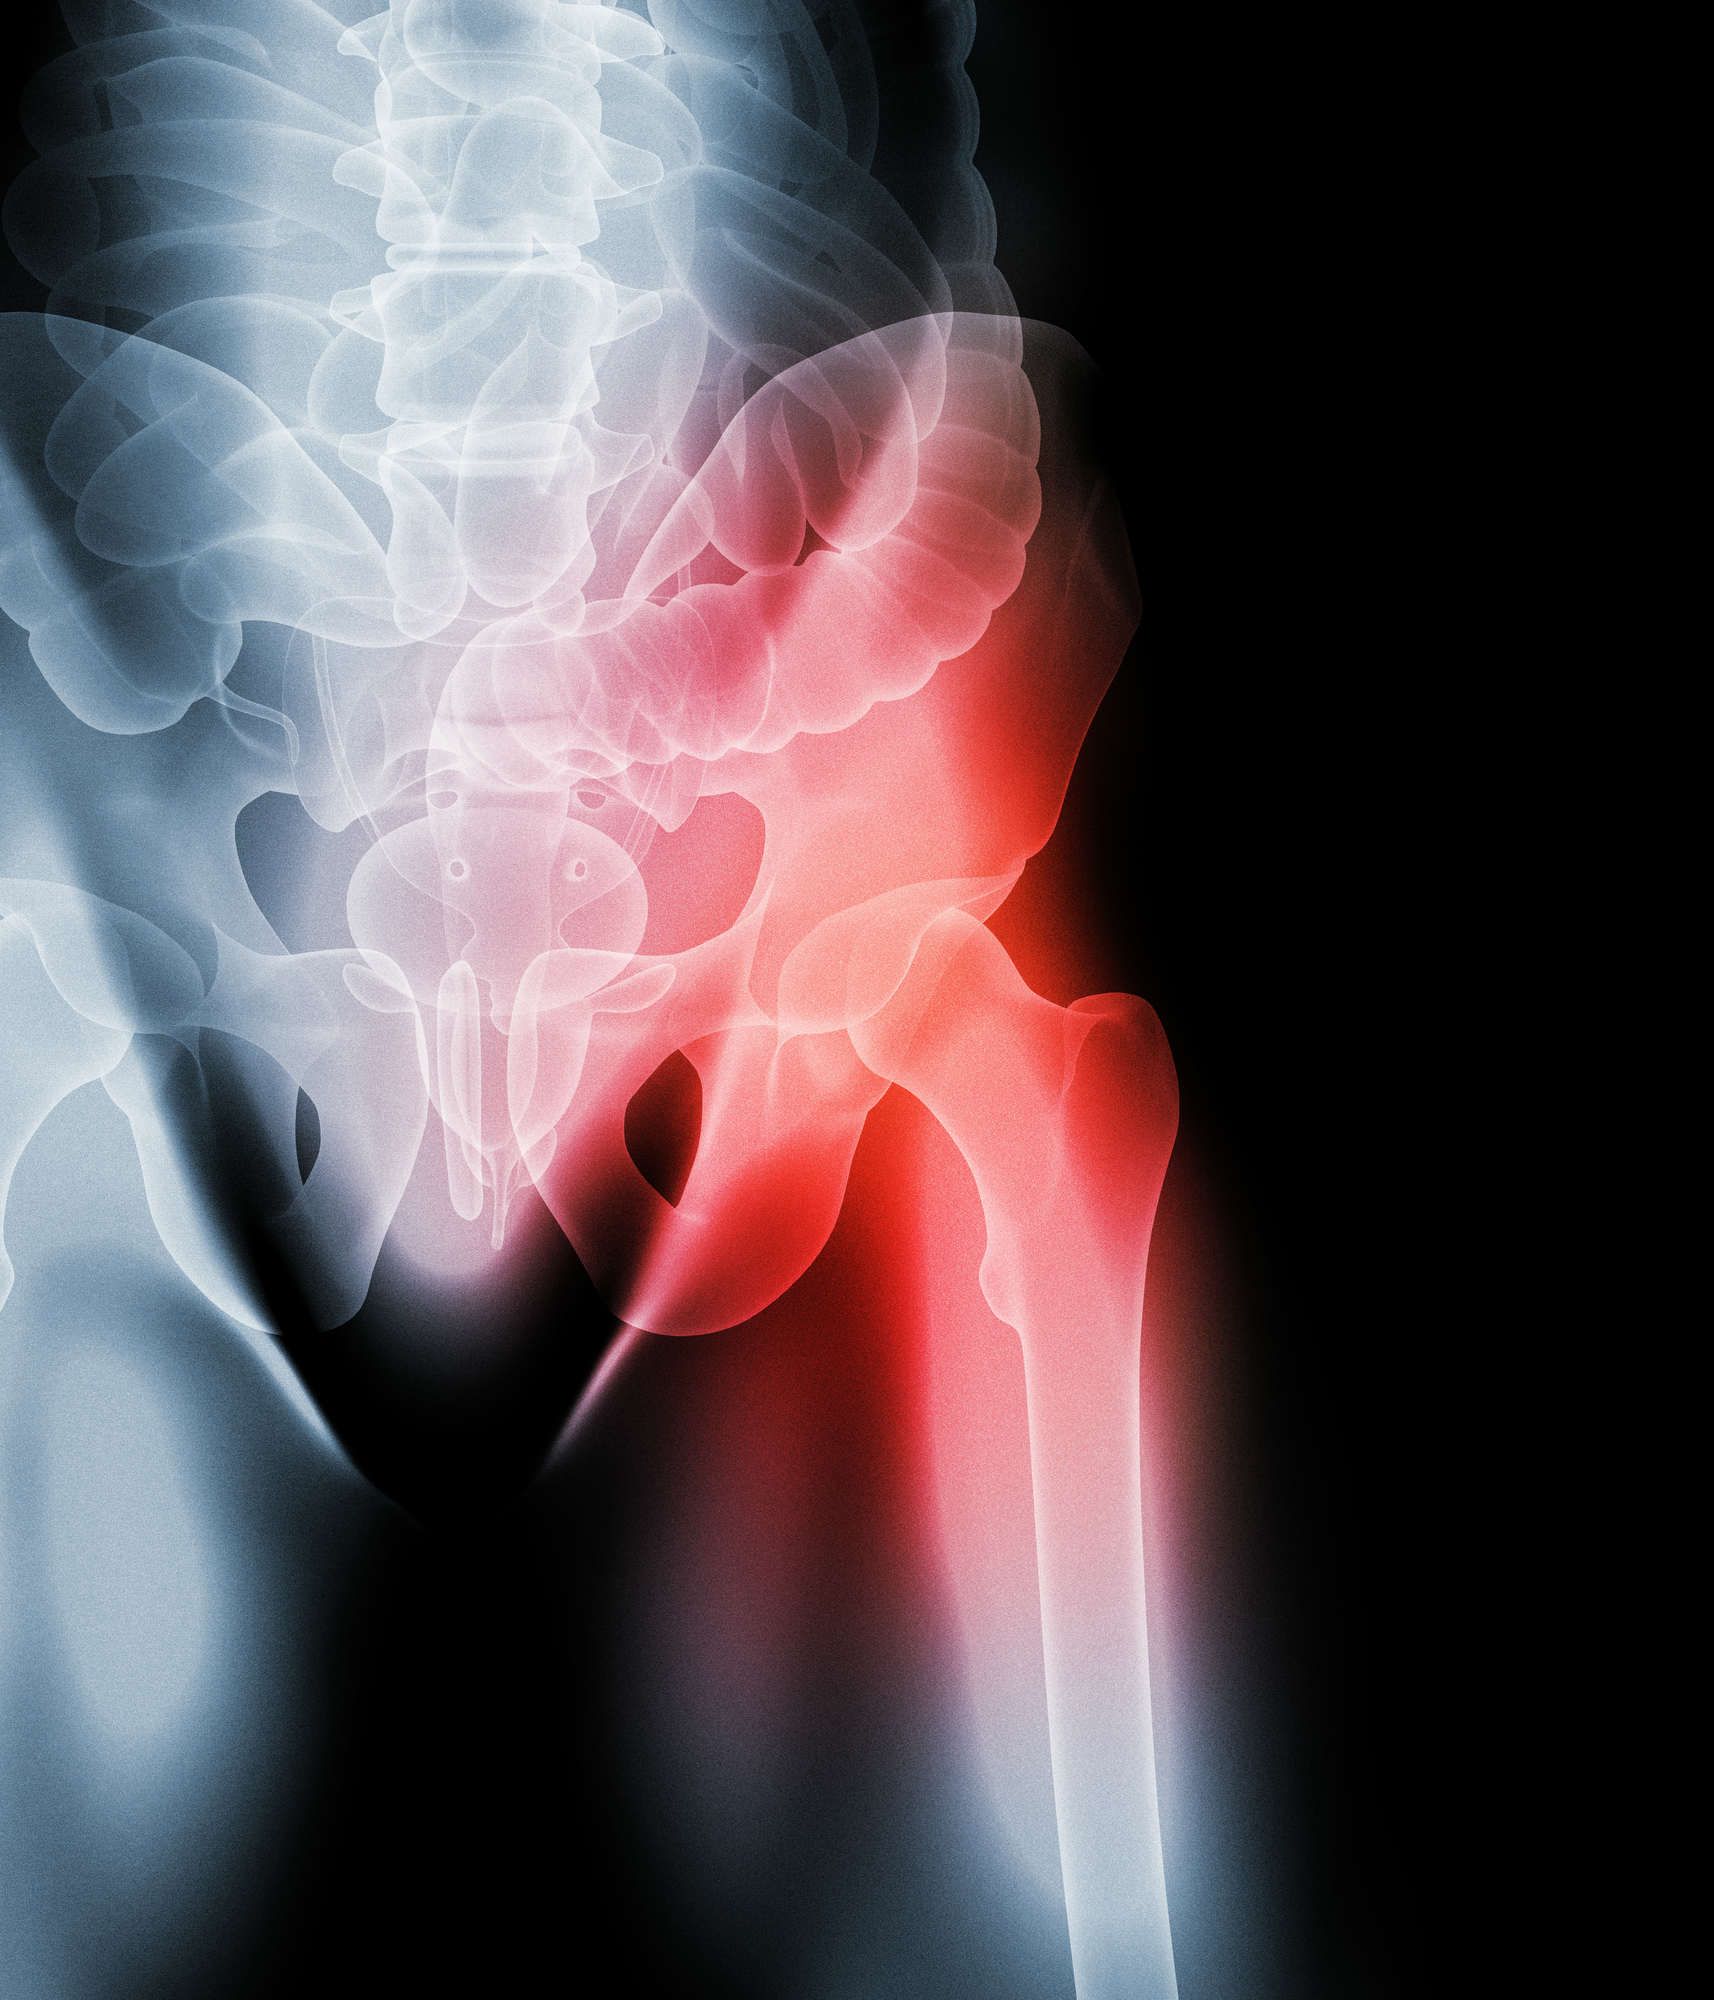 Couple Files DePuy ASR Hip Lawsuit Joining Growing MDL